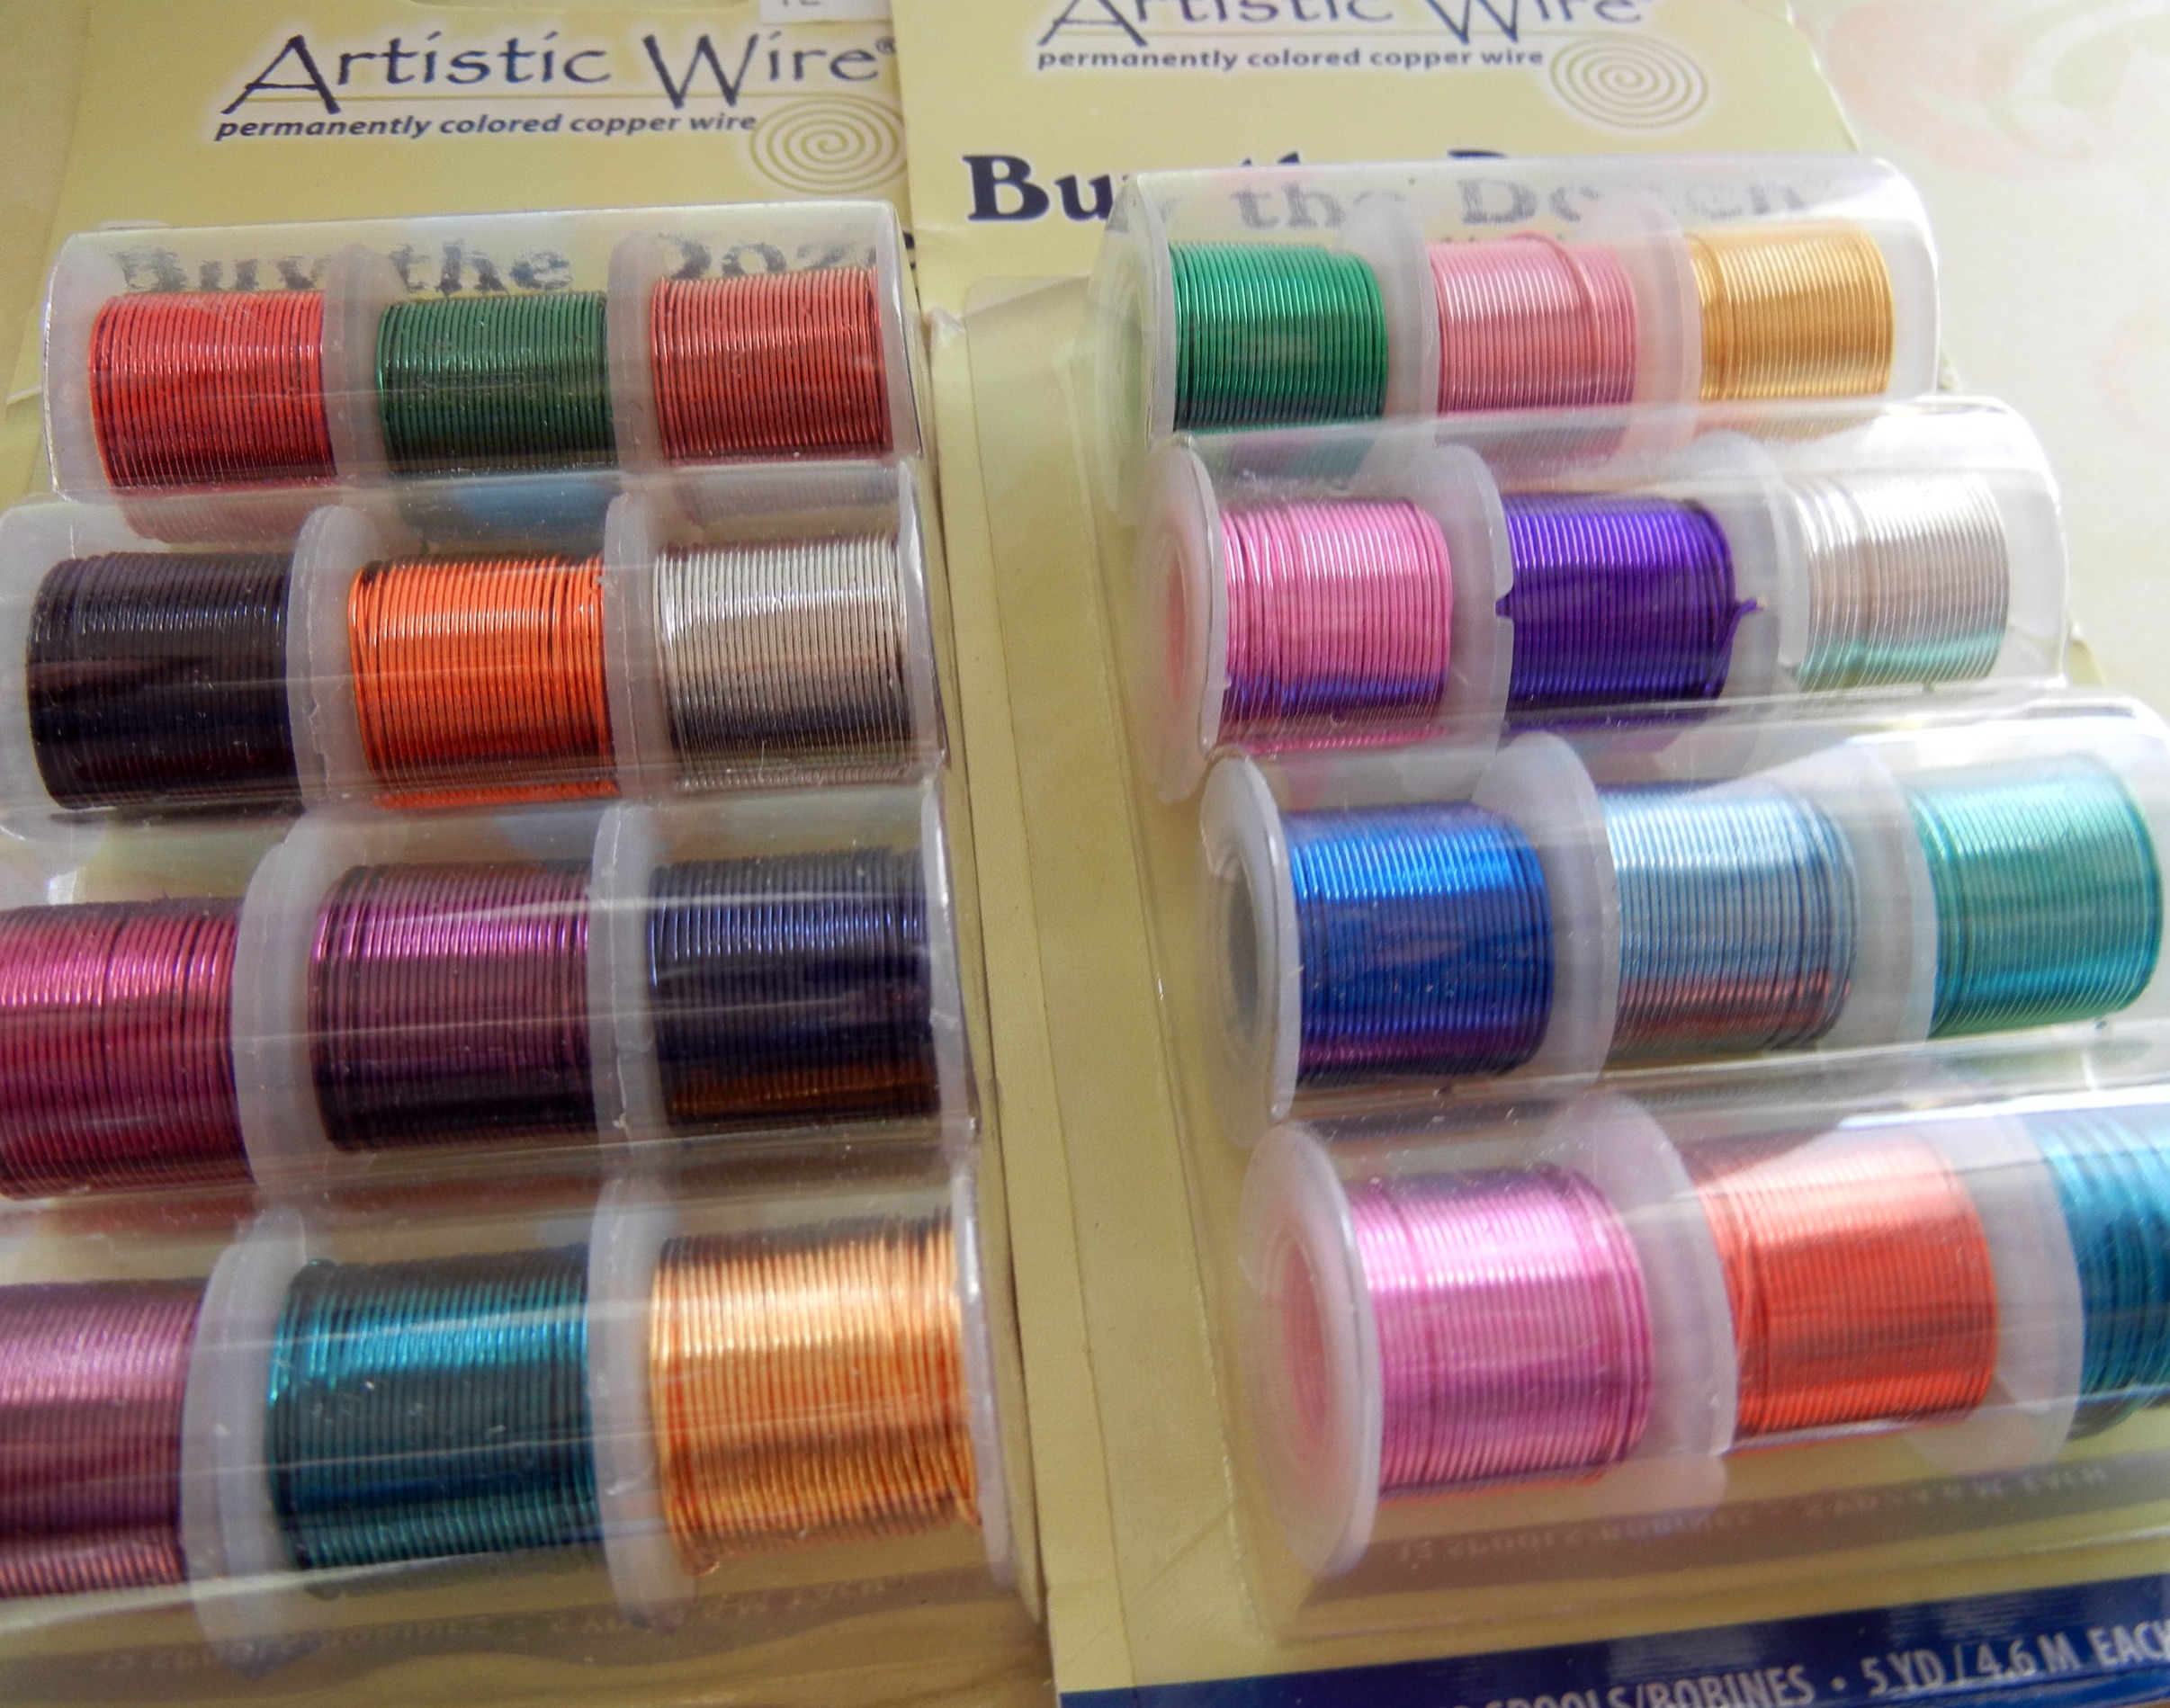 New Artistic Wire color variety packs – Rings and Things